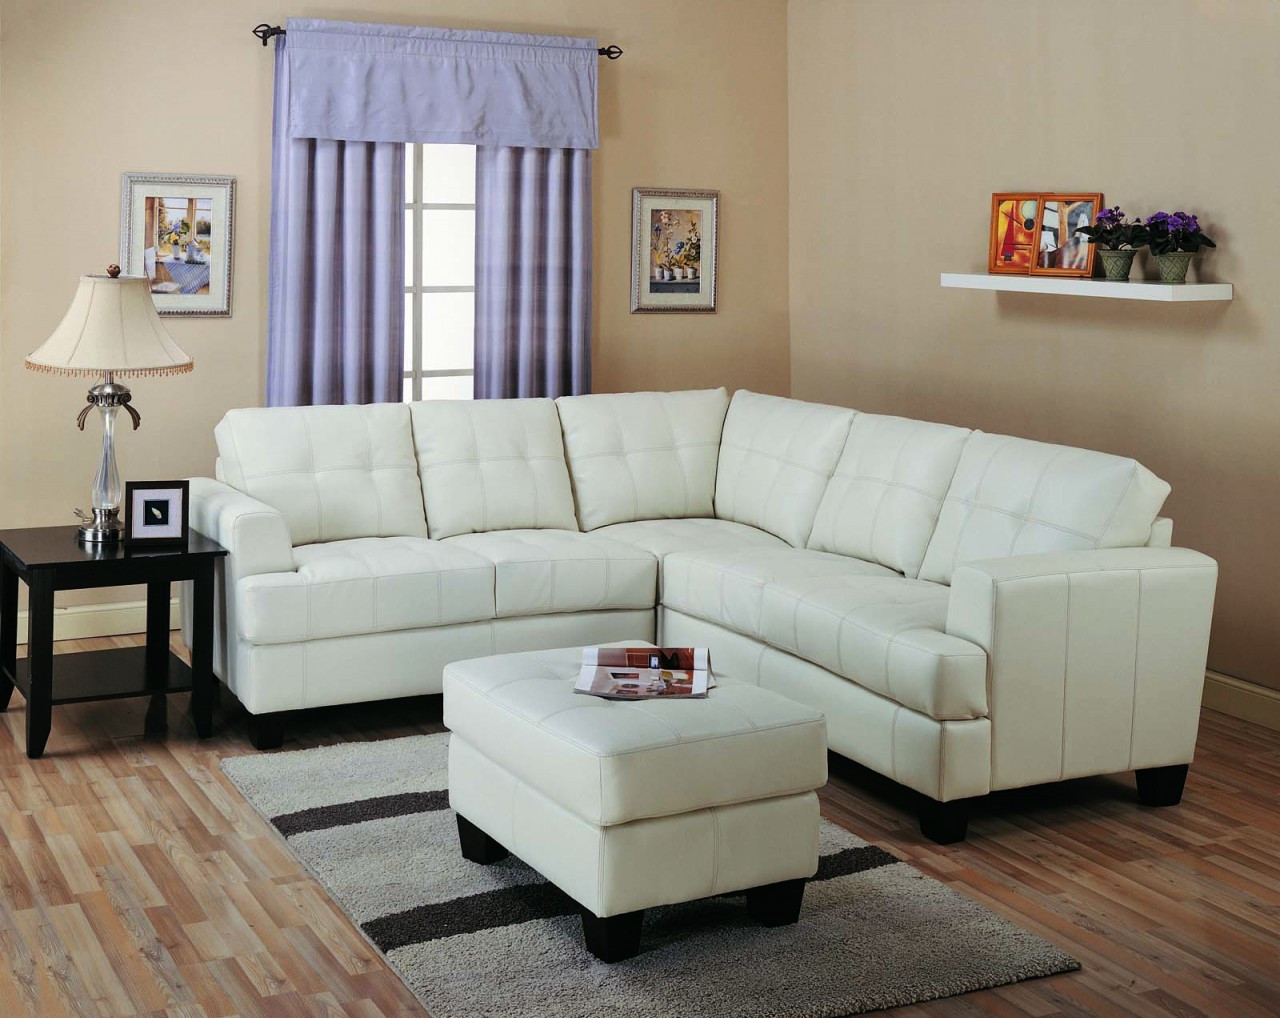 Small Living Room sofas Unique Types Of Best Small Sectional Couches for Small Living